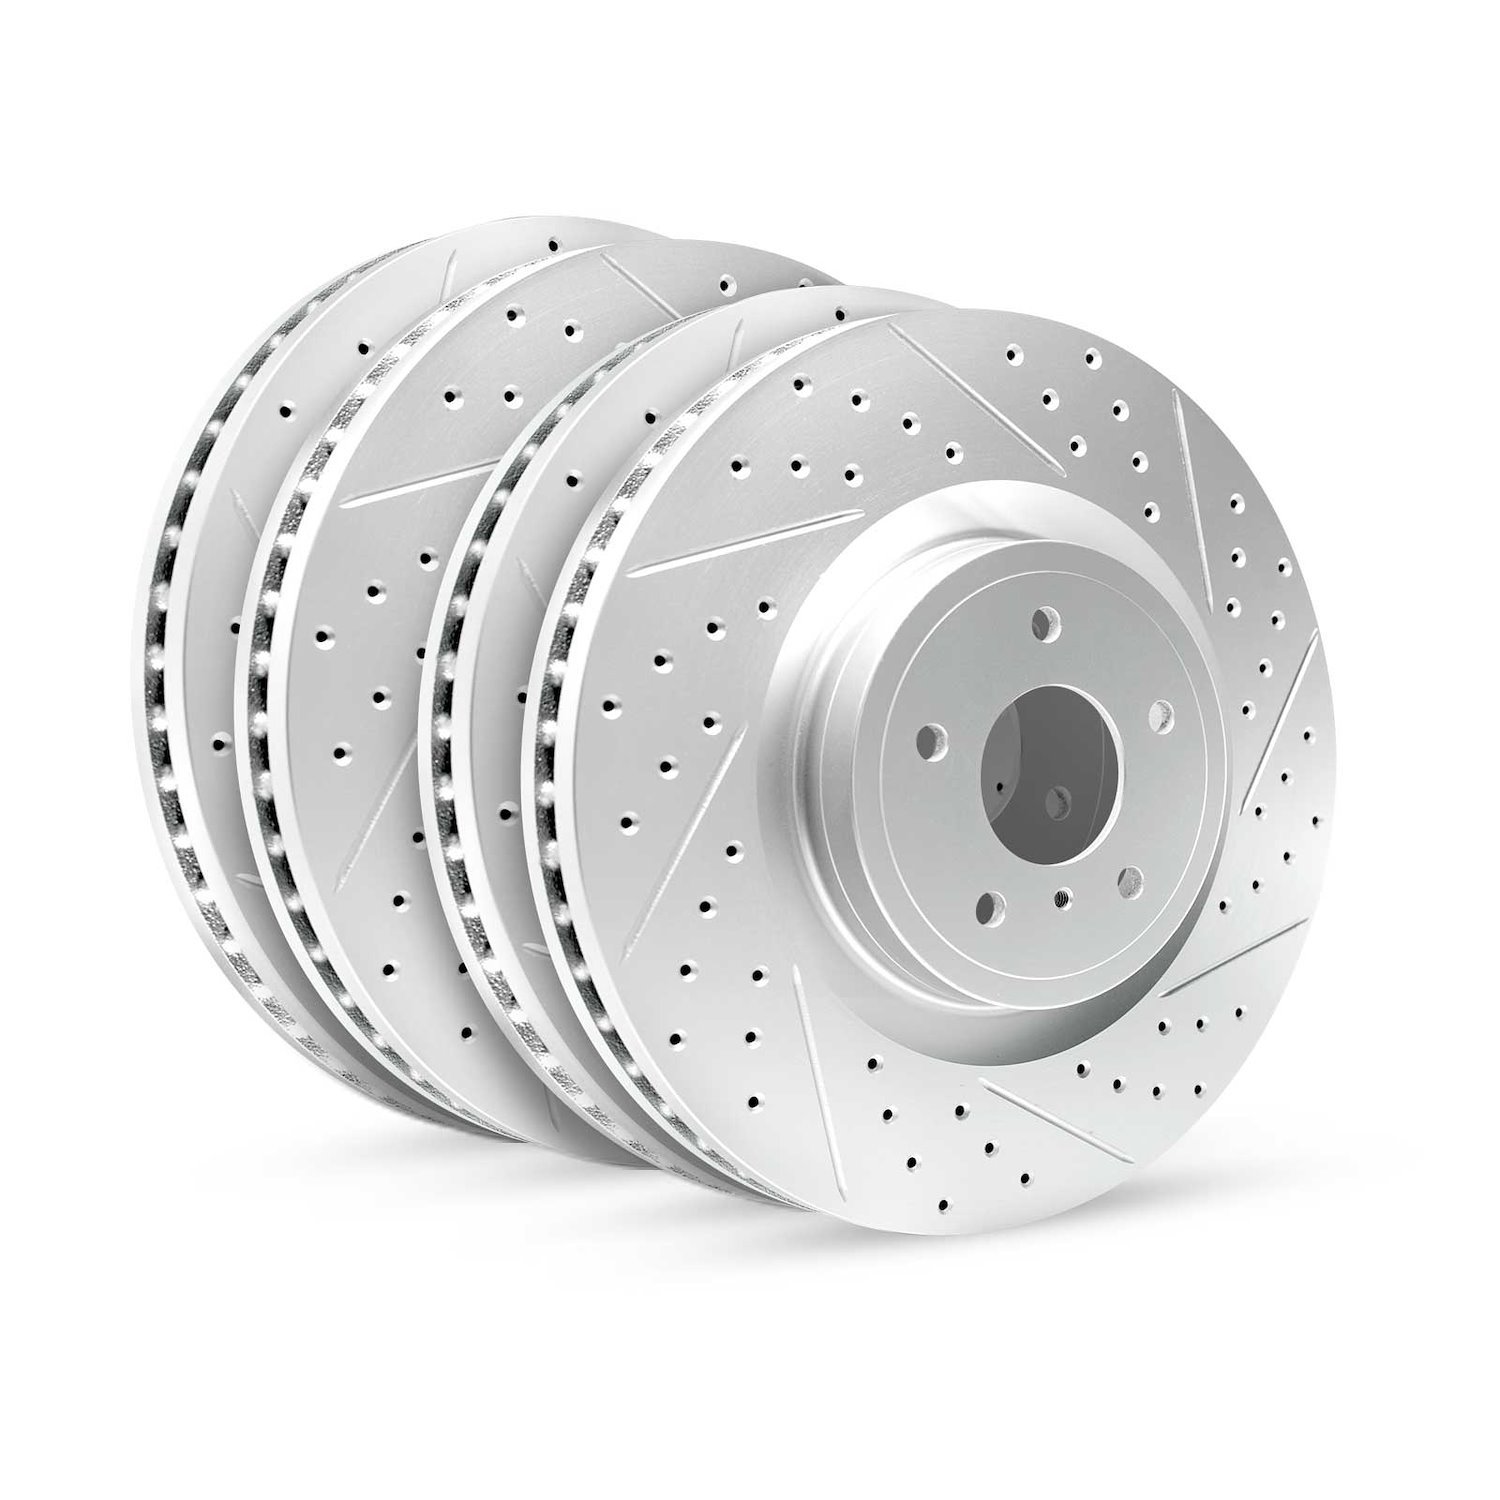 GEO-Carbon Drilled/Slotted Rotors, Fits Select Tesla, Position: Front/Rear